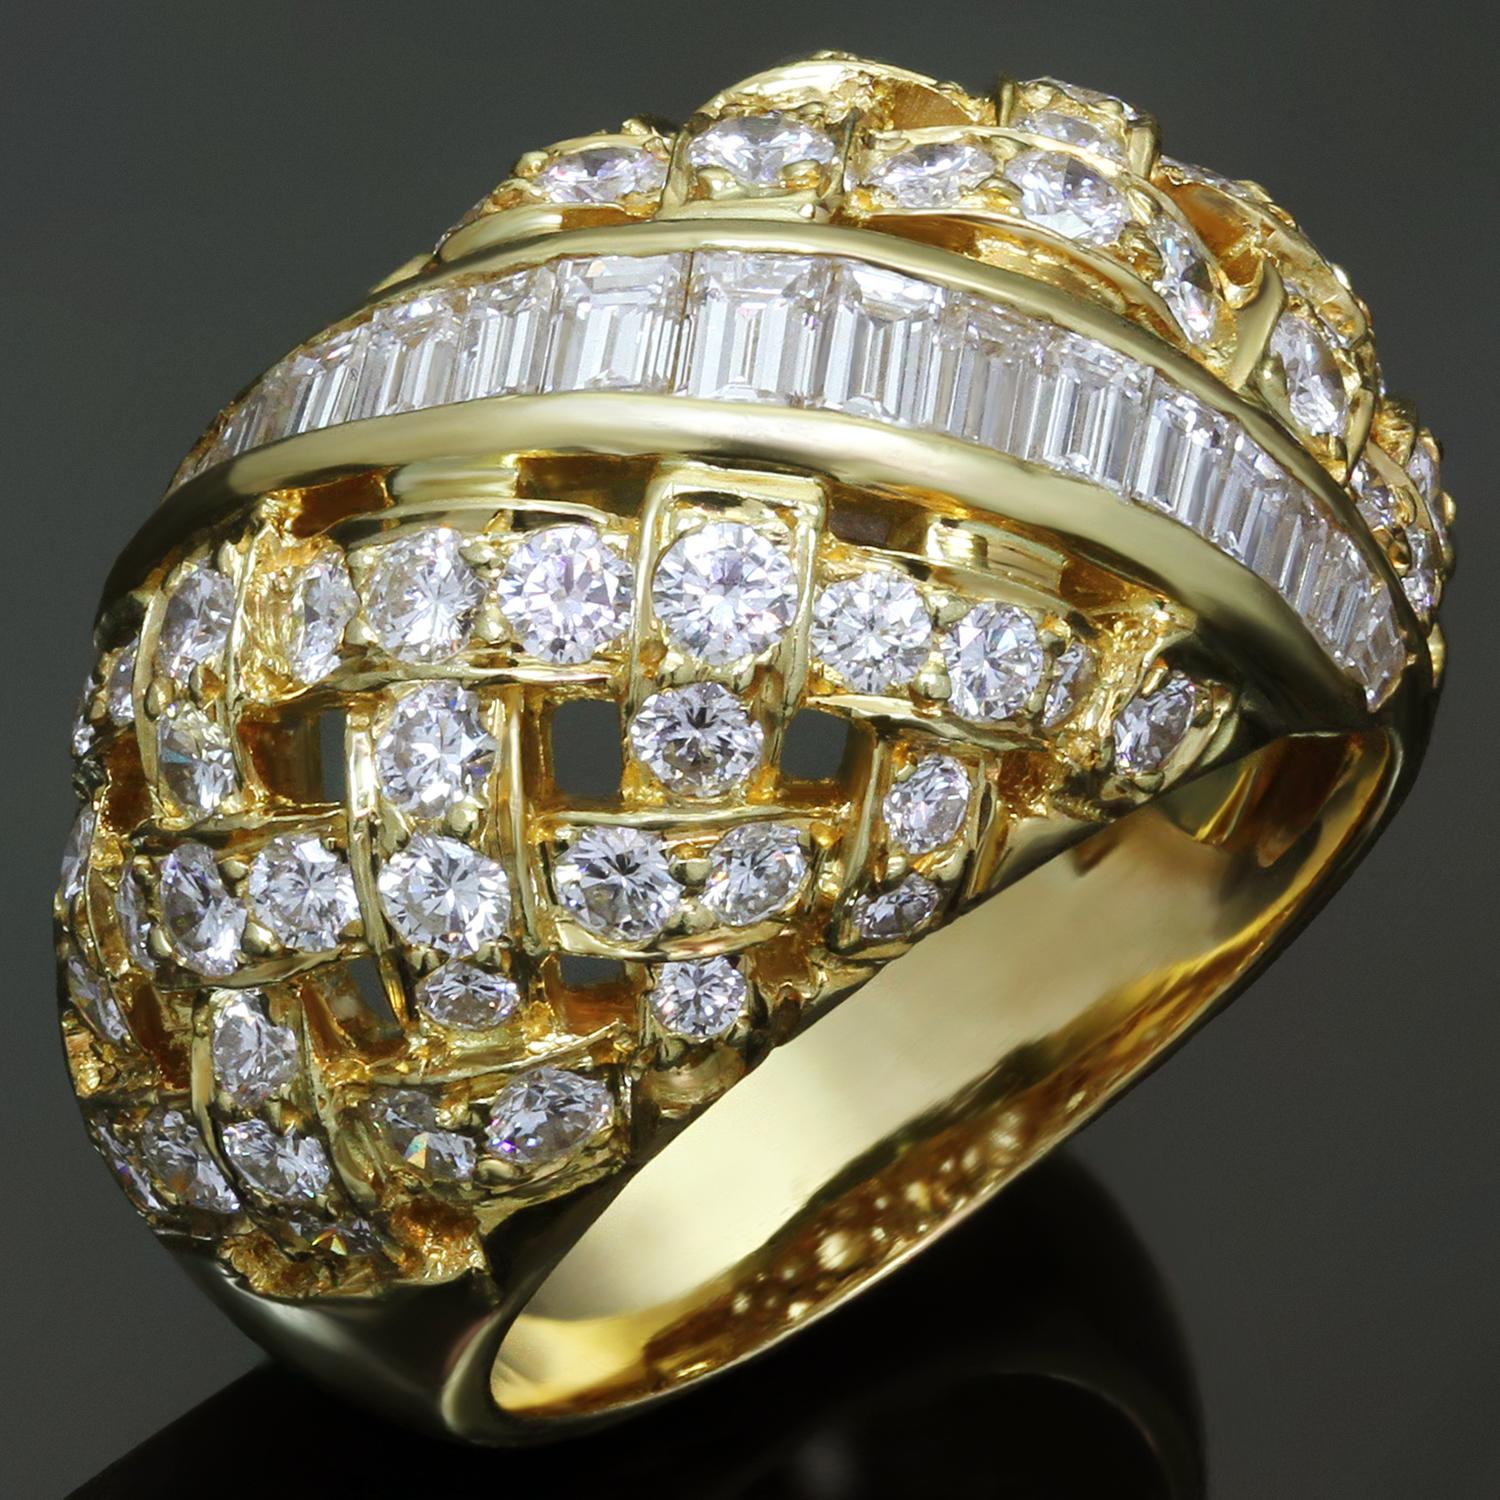 This impressive ring from the exquisite Vannerie collection by Tiffany & Co. is crafted in 18k yellow gold and set with 70 brilliant-cut round diamonds weighing an estimated 3.00 carats and 17 baguette-cut diamonds weighing an estimated 1.00 carats.